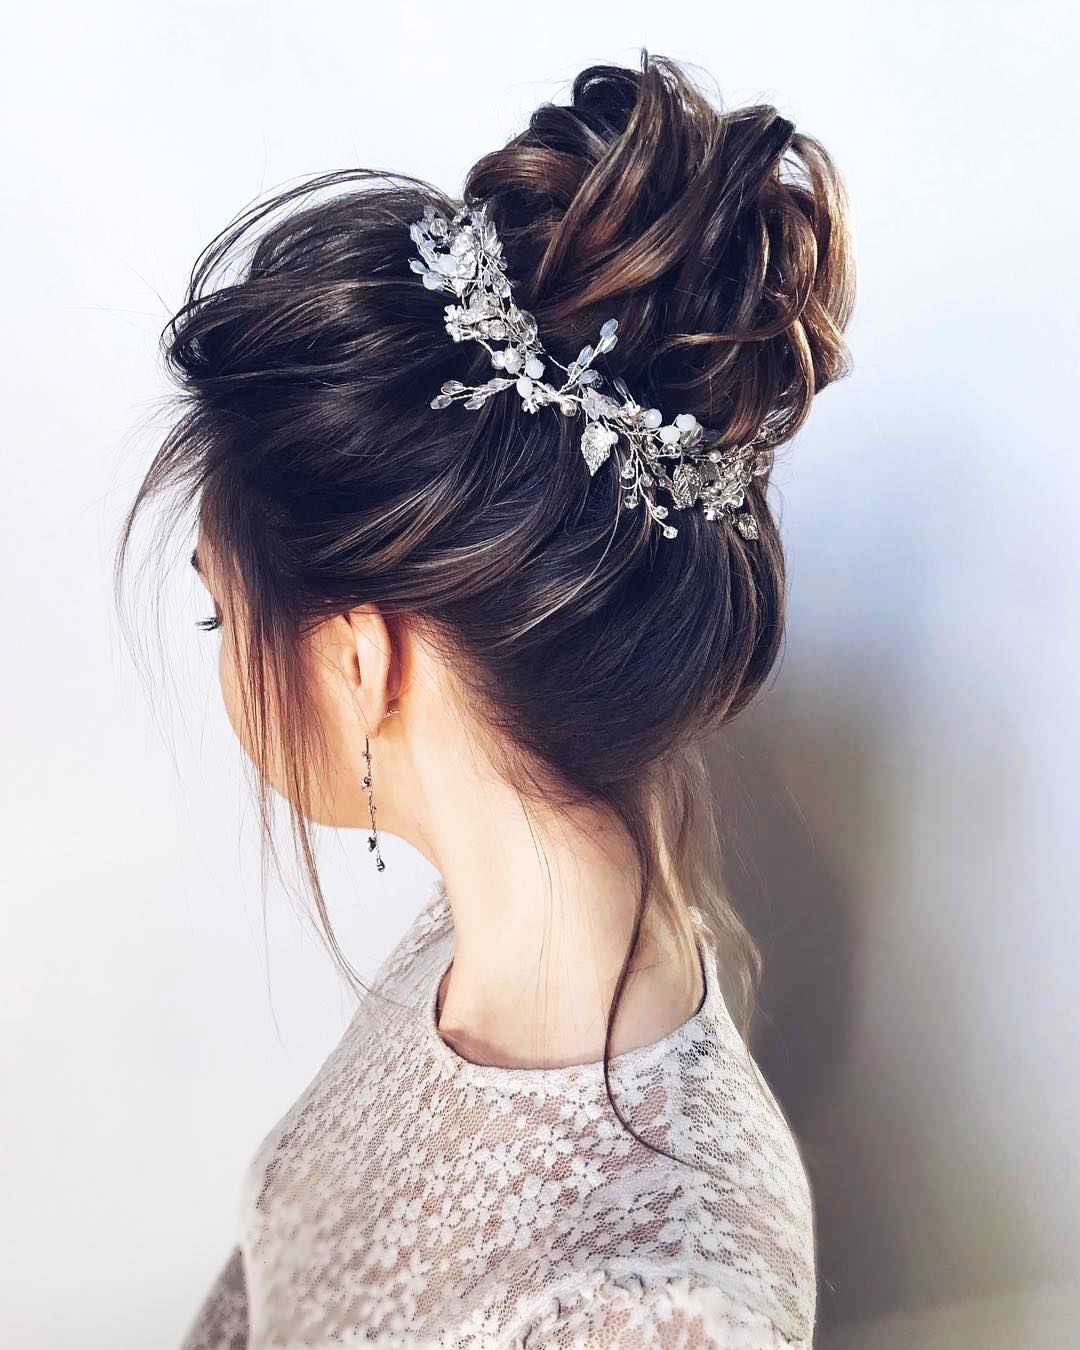 Hairstyles For Prom 2020
 61 Latest Hairstyles For Graduation Ideas 2019